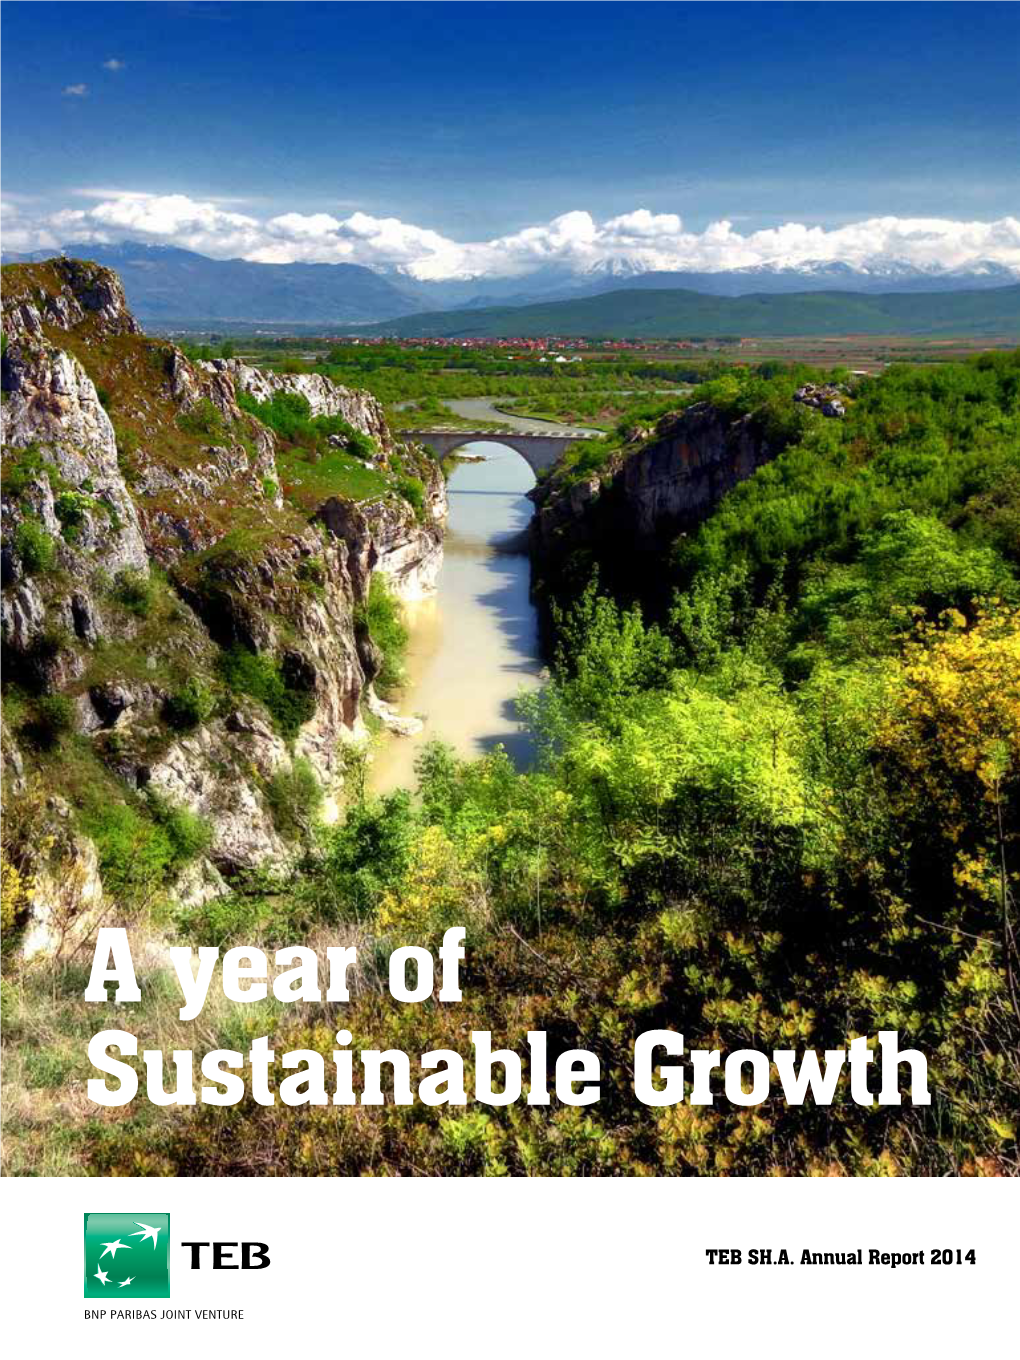 A Year of Sustainable Growth